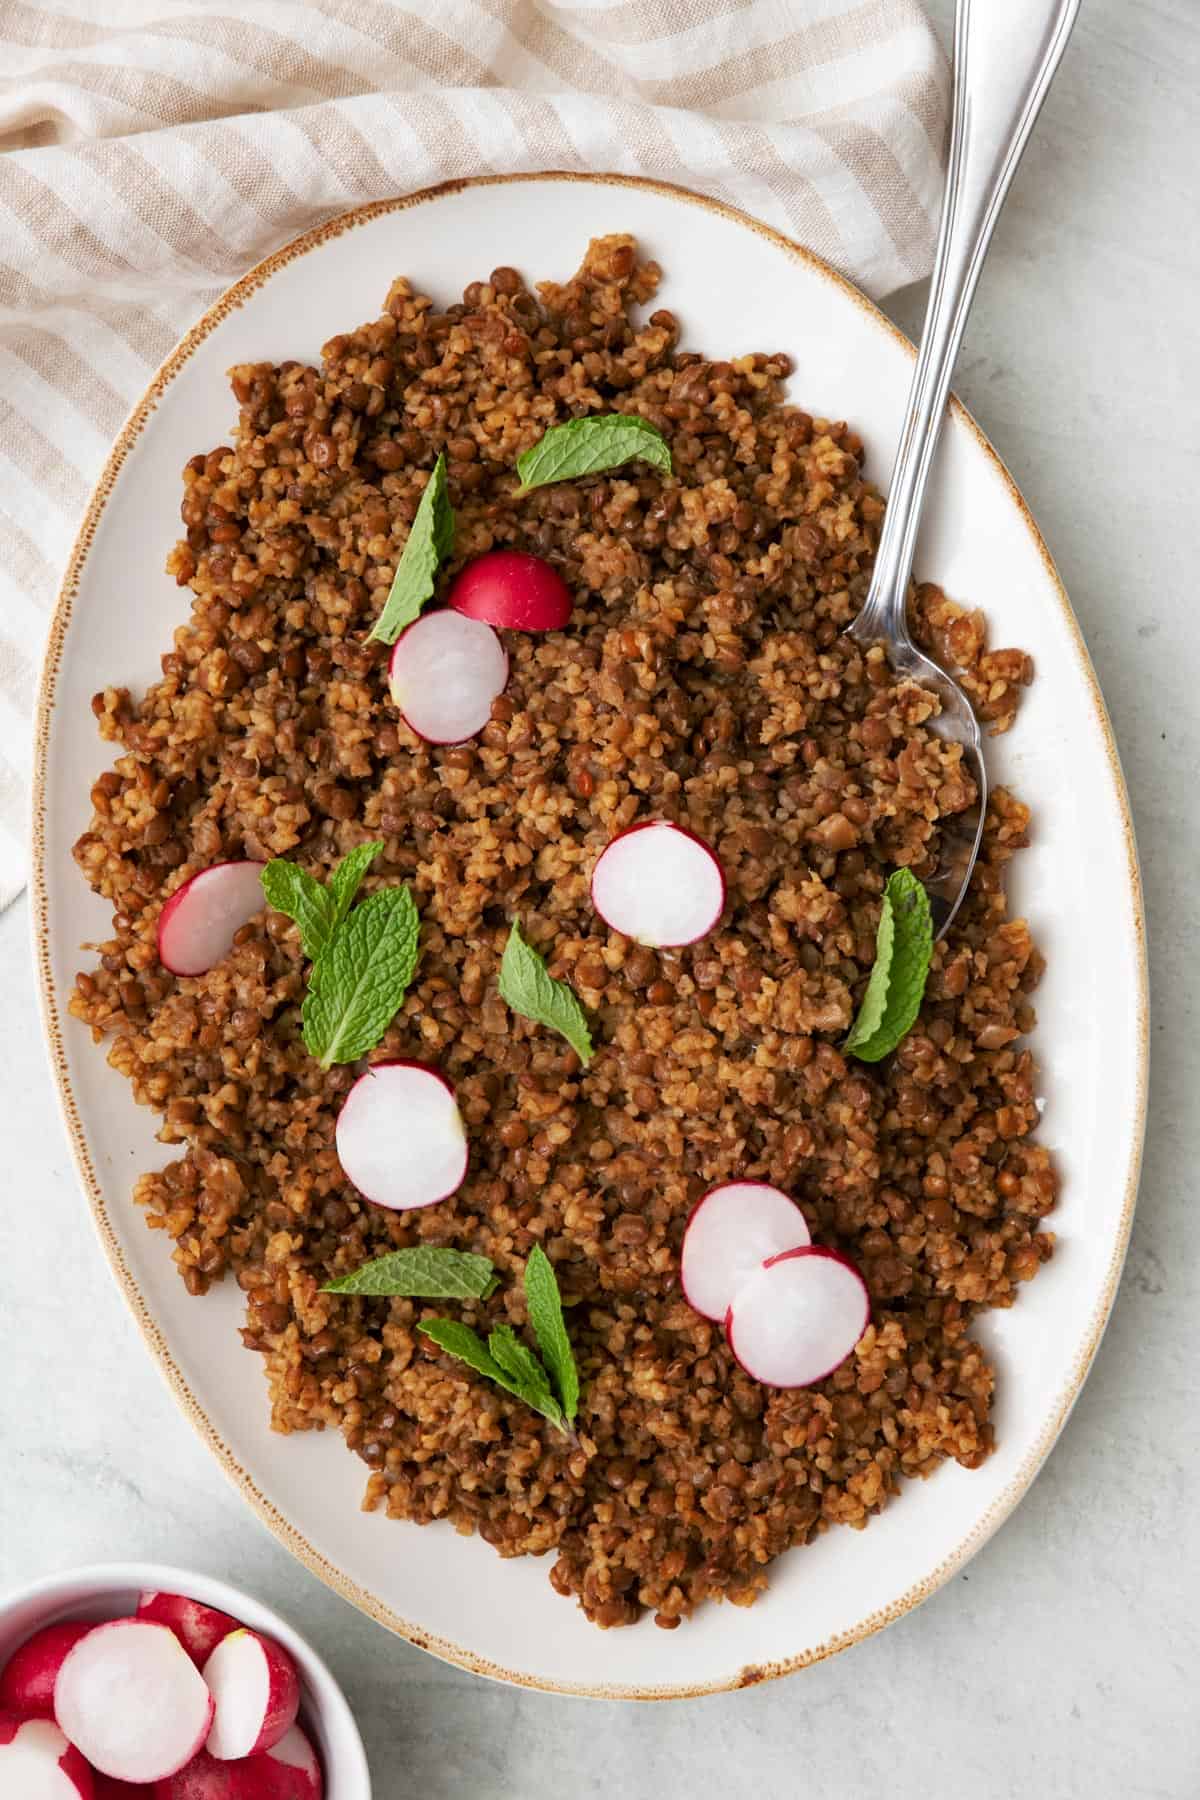 Mujadara hamra in a large shallow serving platter with a serving spoon garnished with fresh mint leaves and a small bowl or radishes cut in half nearby.